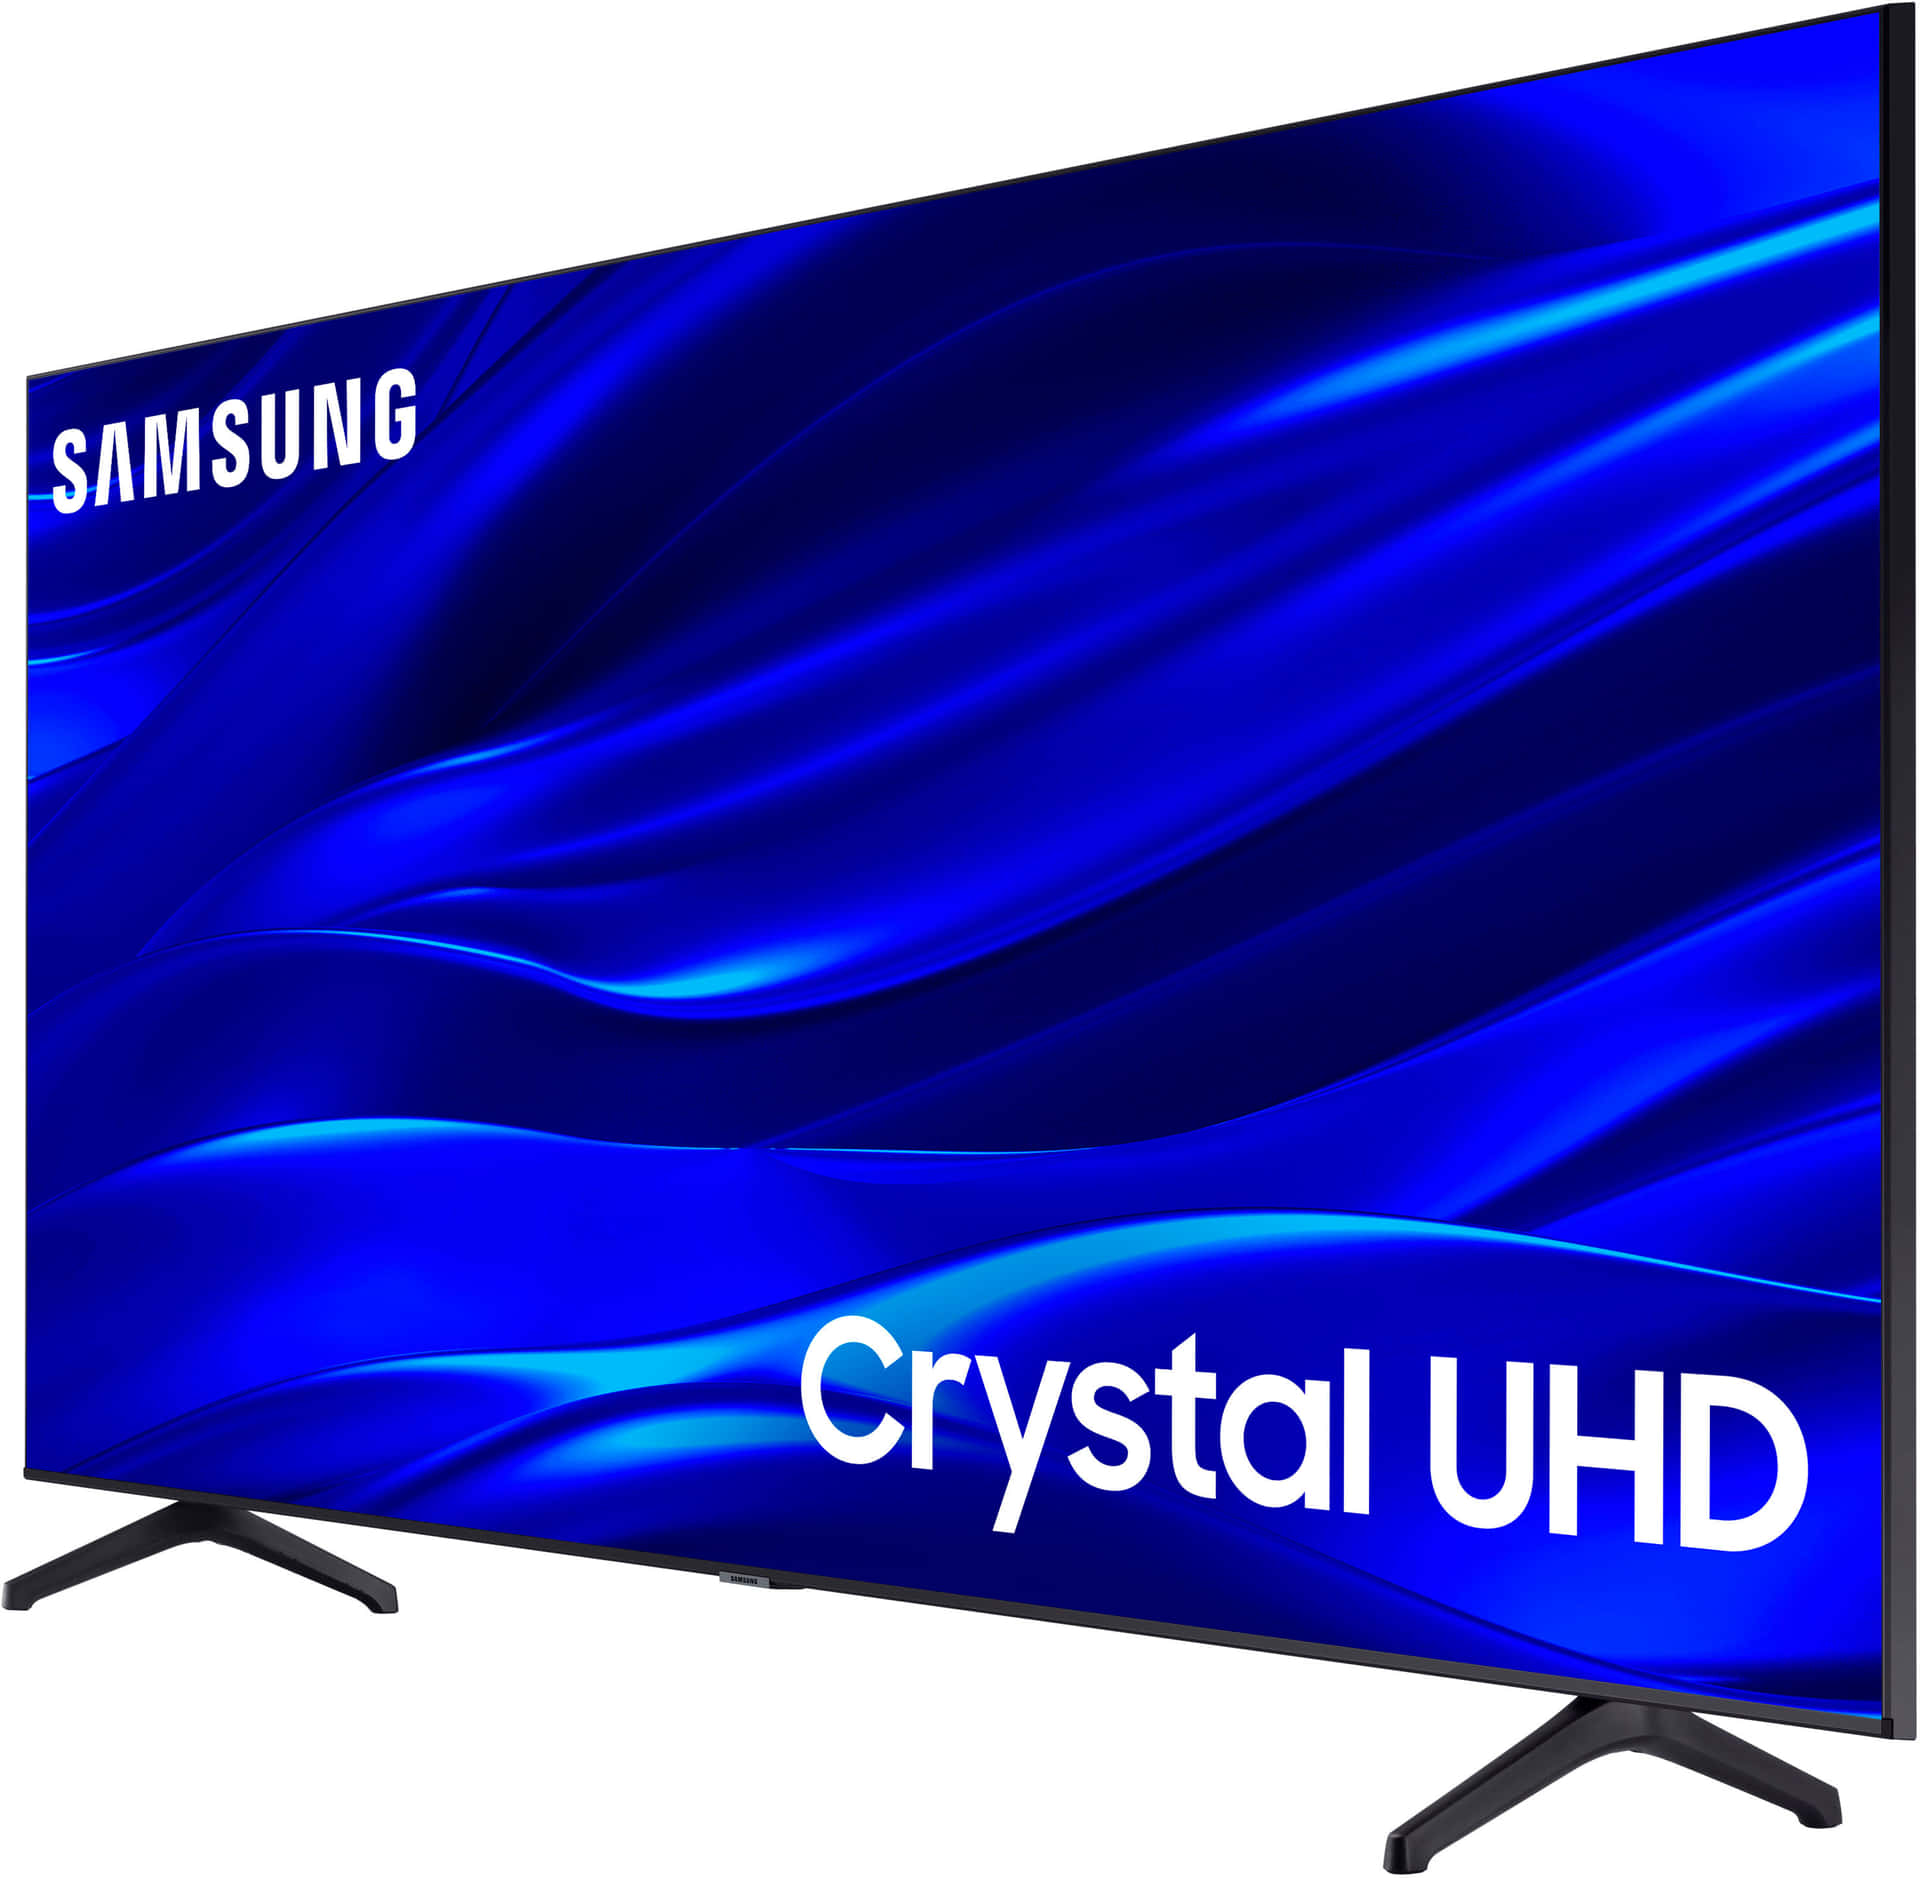 Samsung Crystal UHD TV Picture